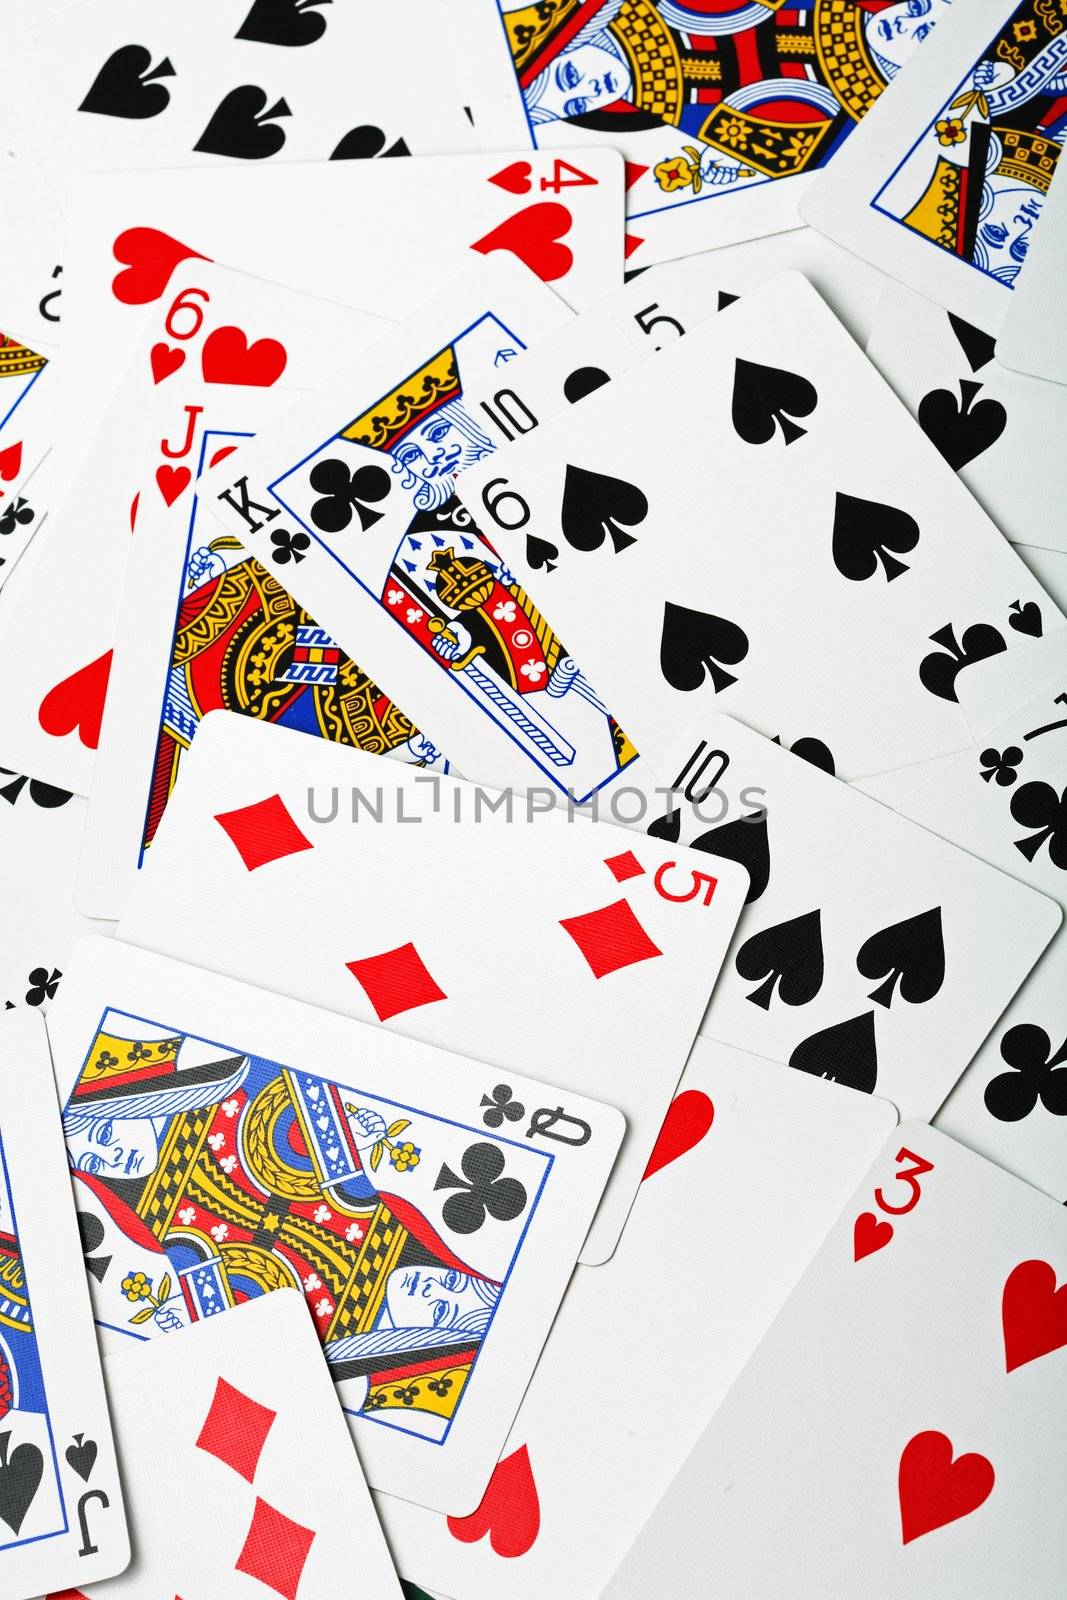 new, un-used playing cards in a random arrangement